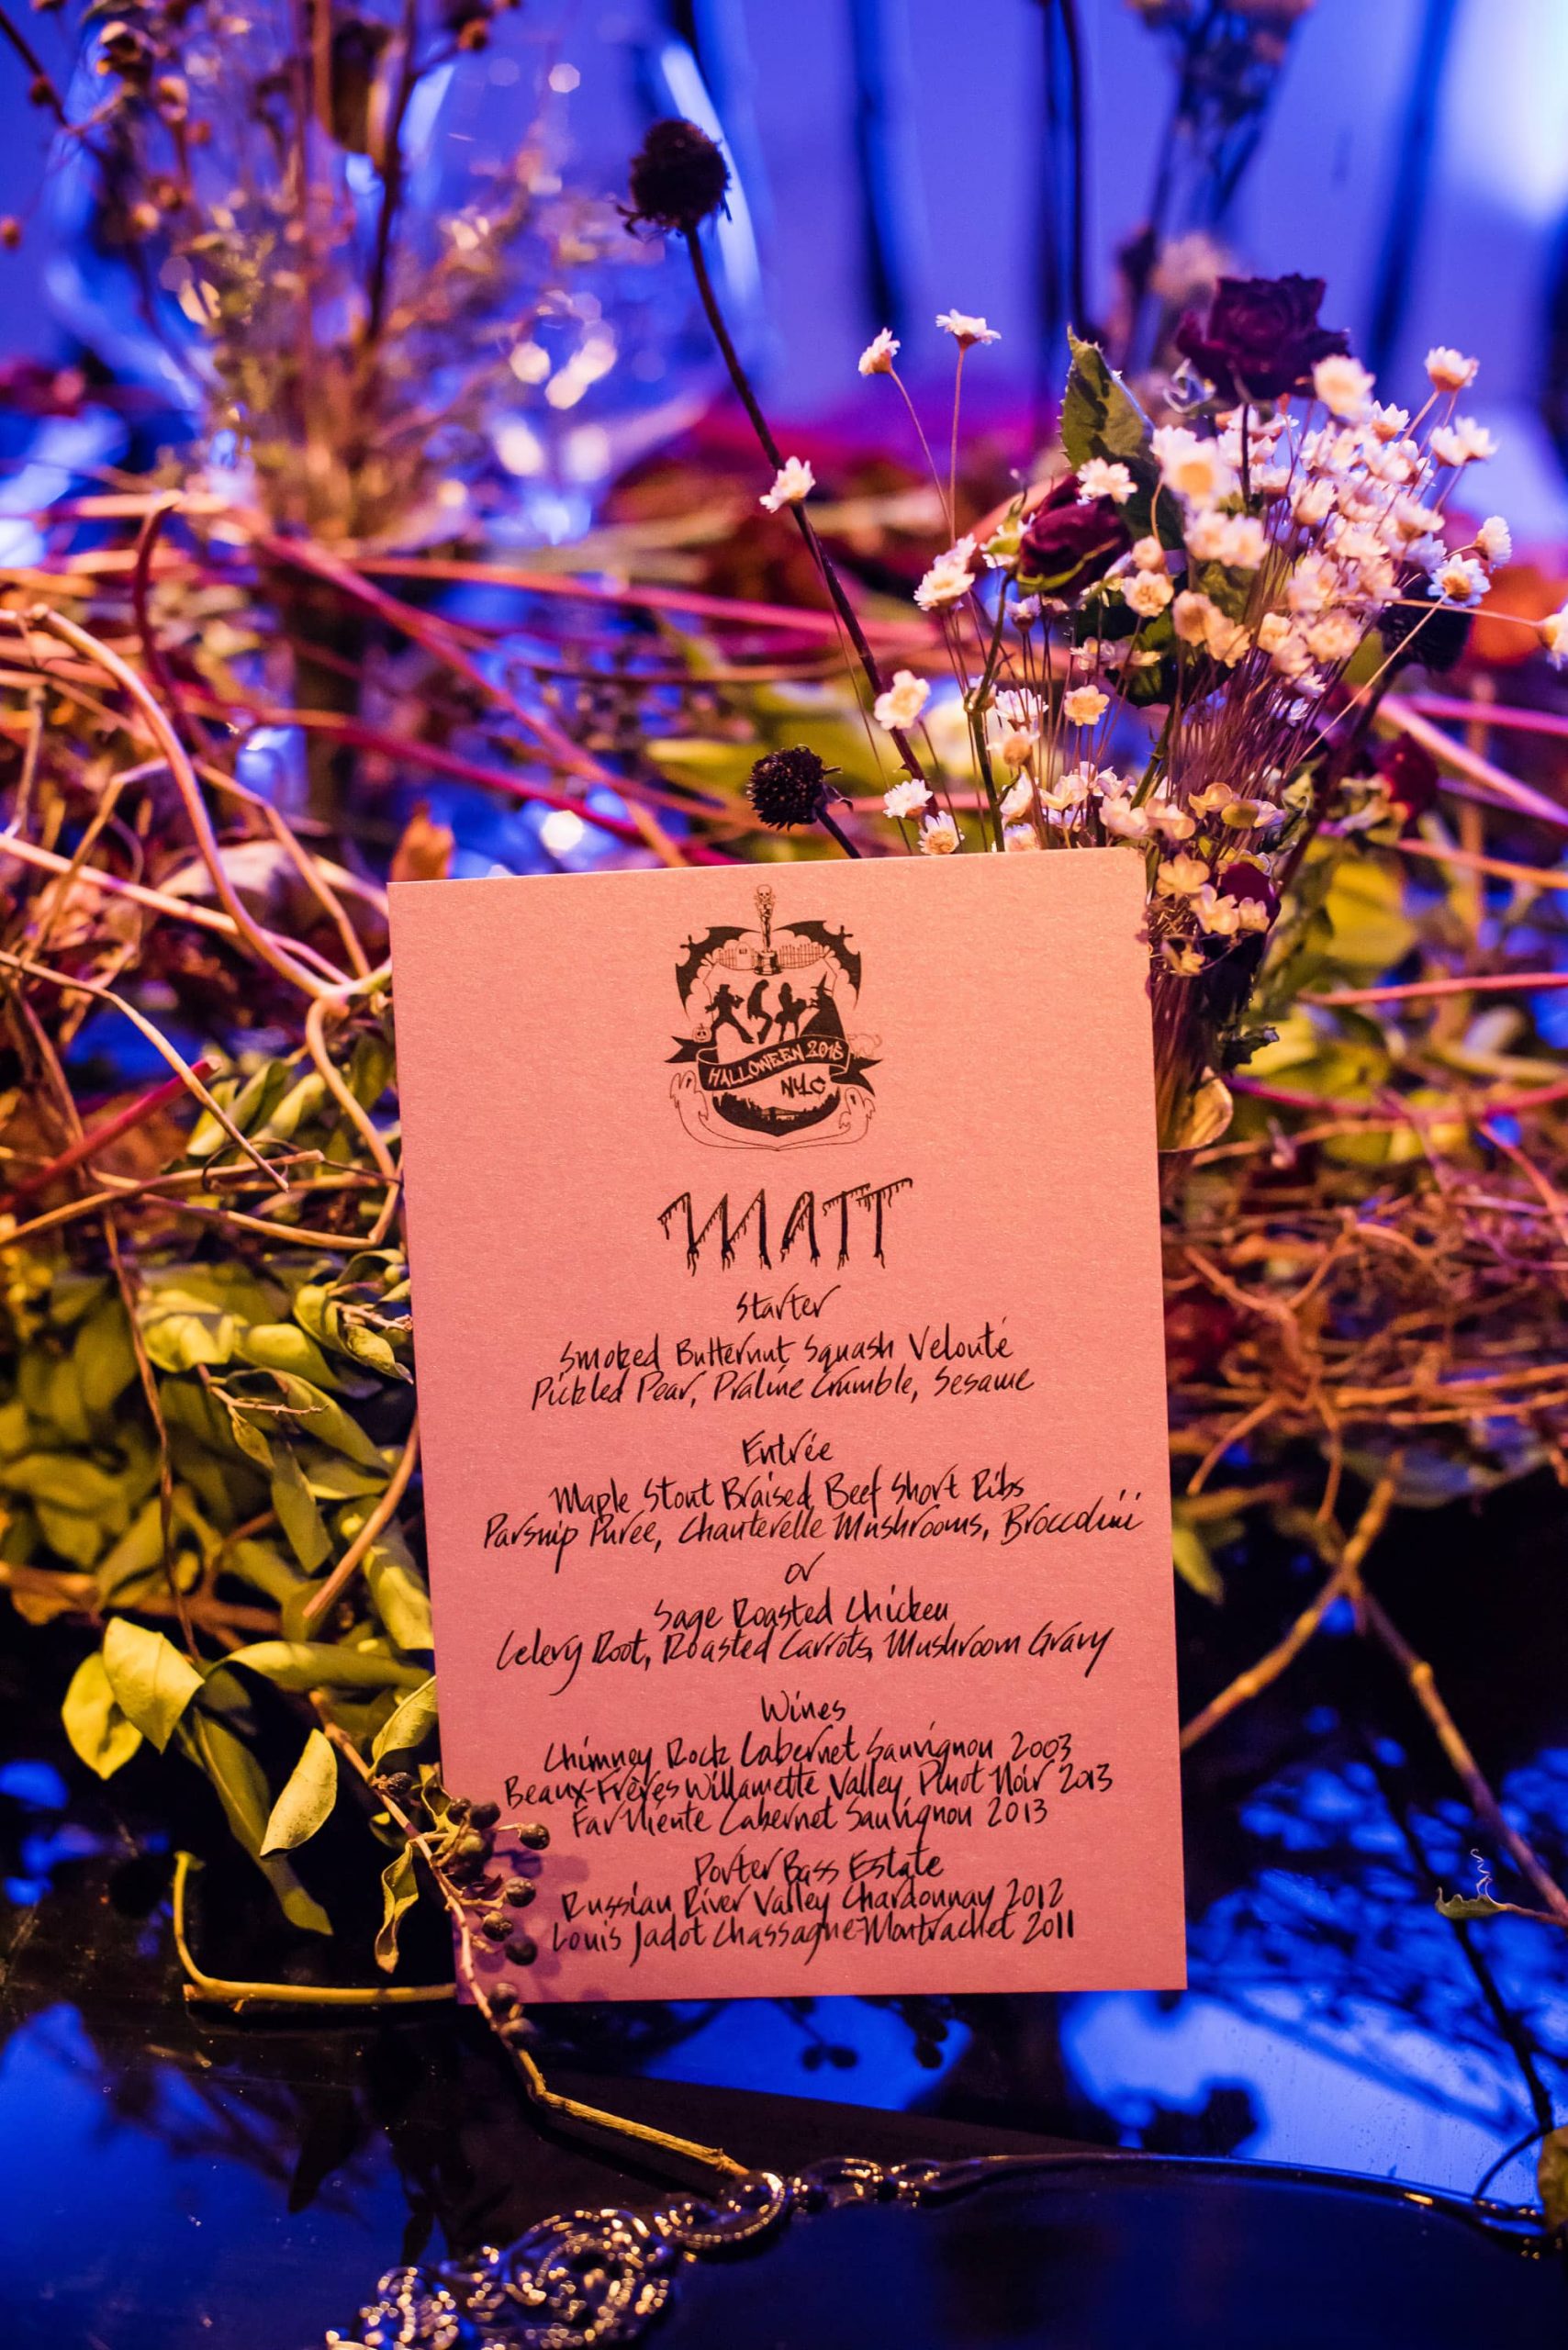 Guest and menu stationery at this epic halloween party at The Standard in NYC | Photo by Gruber Photographers